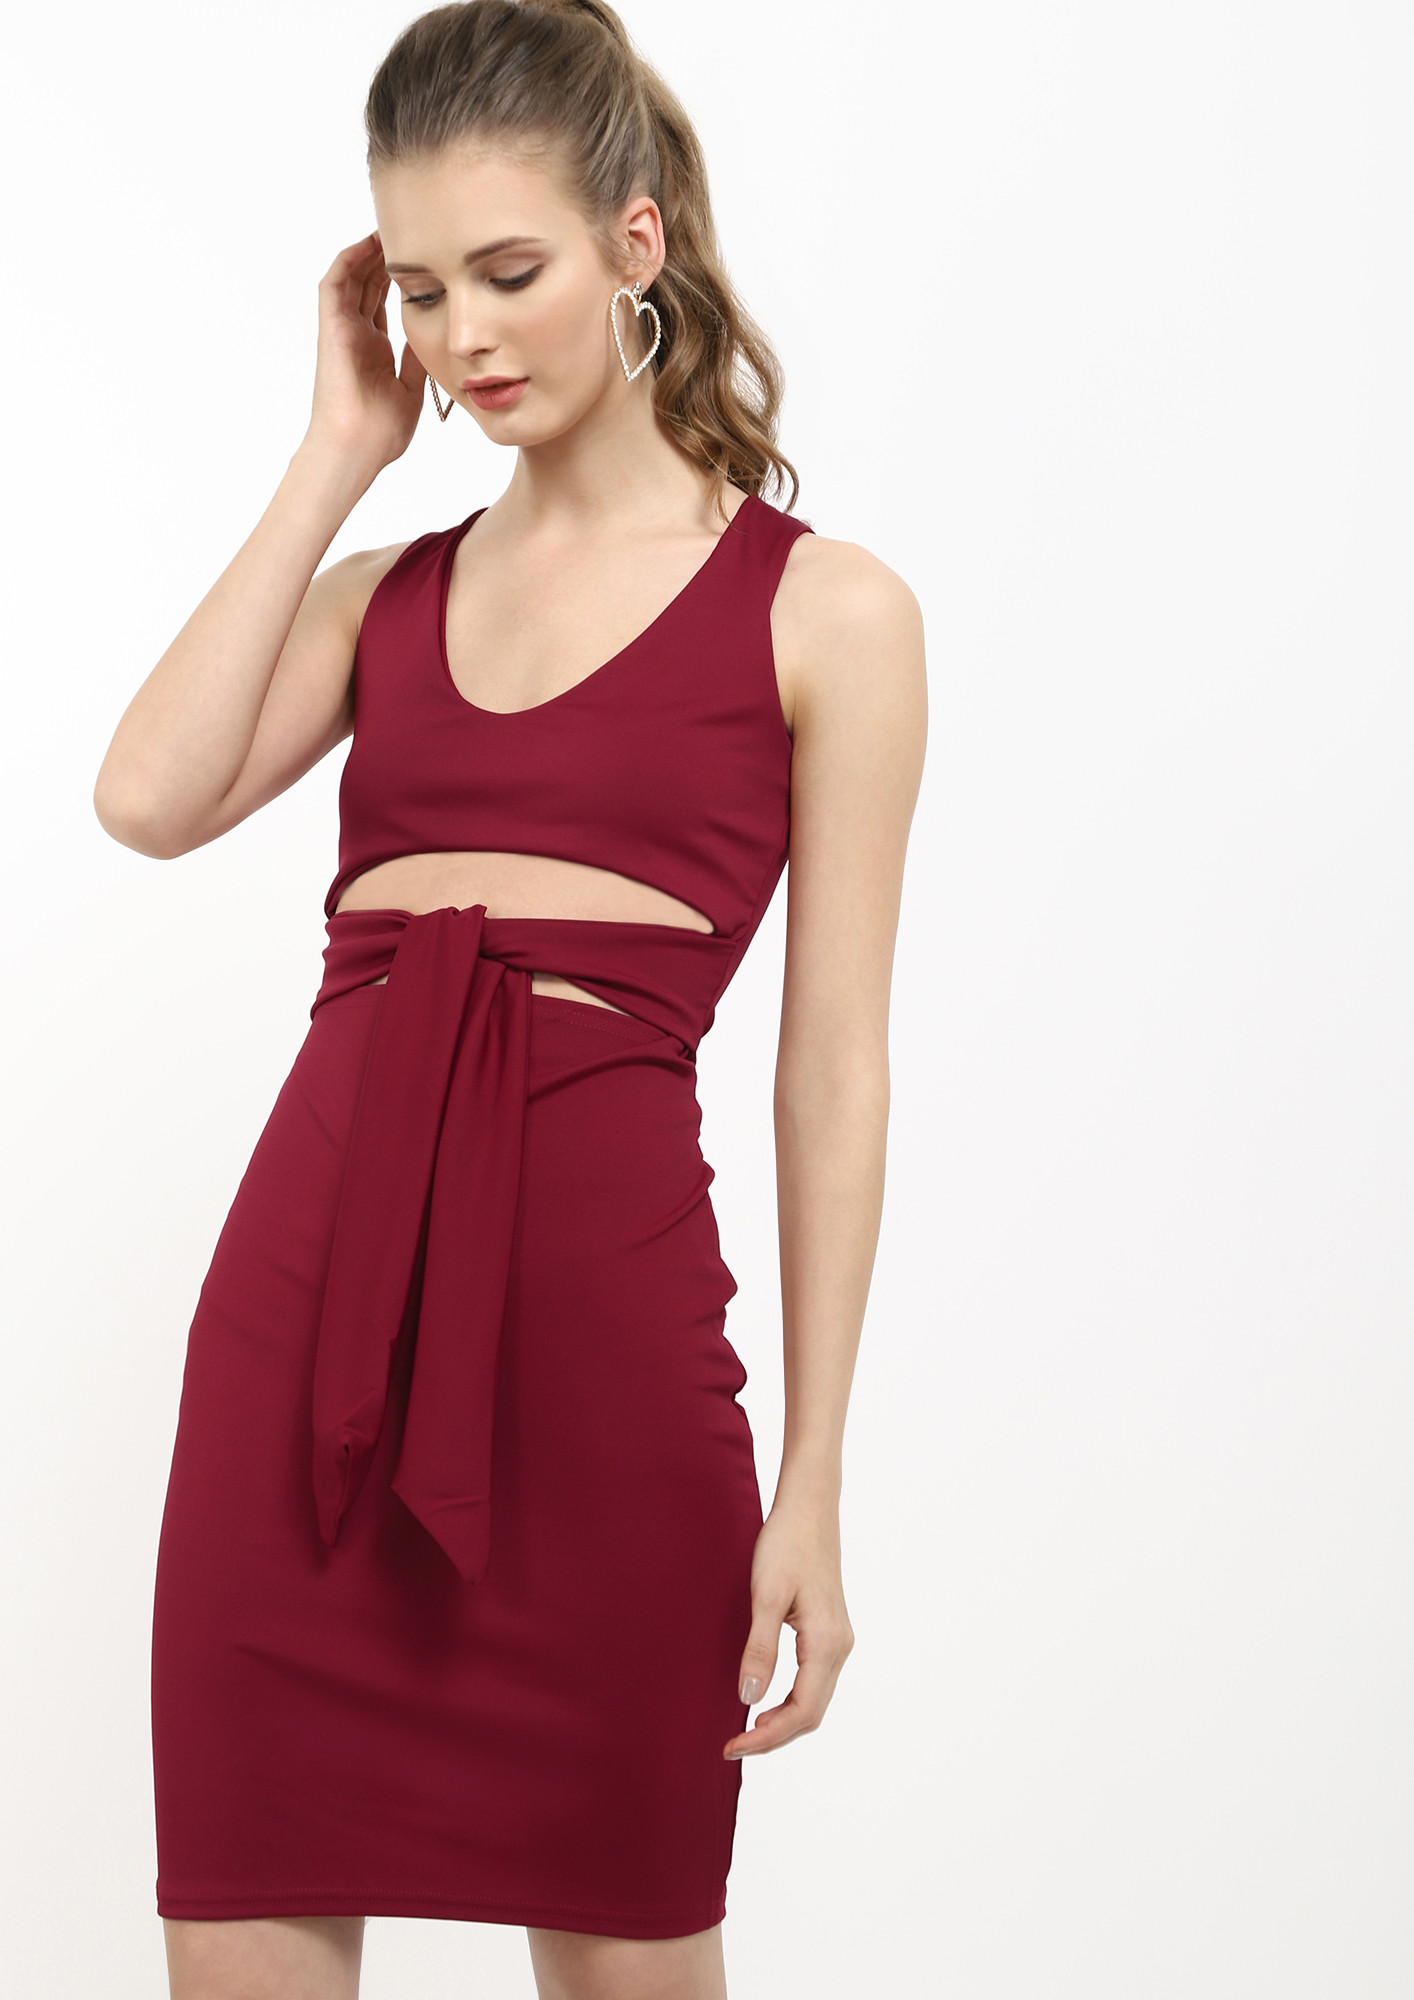 THE MIDDLE GROUND MAROON BODYCON